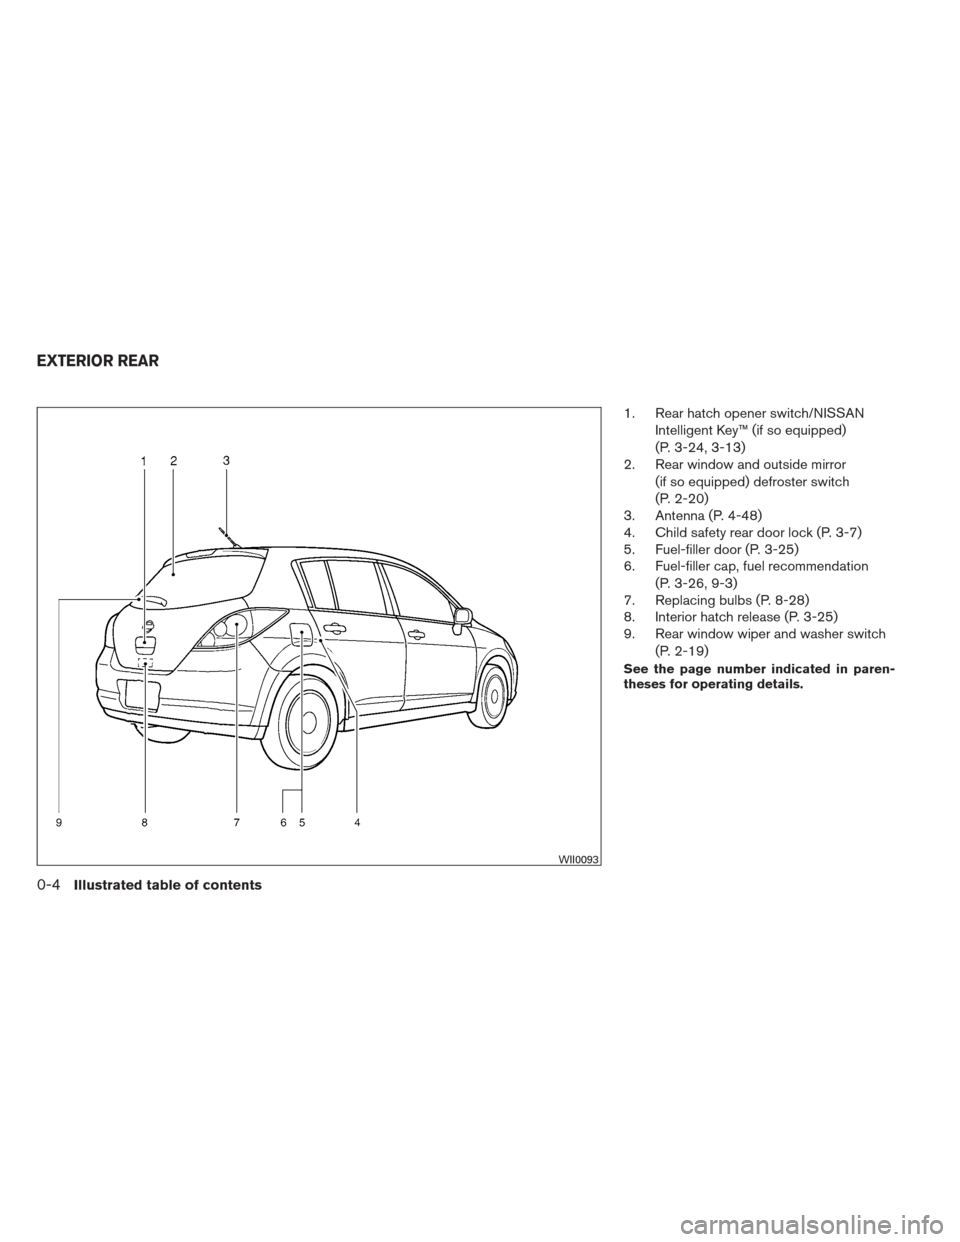 NISSAN VERSA HATCHBACK 2012 1.G User Guide 1. Rear hatch opener switch/NISSANIntelligent Key™ (if so equipped)
(P. 3-24, 3-13)
2. Rear window and outside mirror
(if so equipped) defroster switch
(P. 2-20)
3. Antenna (P. 4-48)
4. Child safety